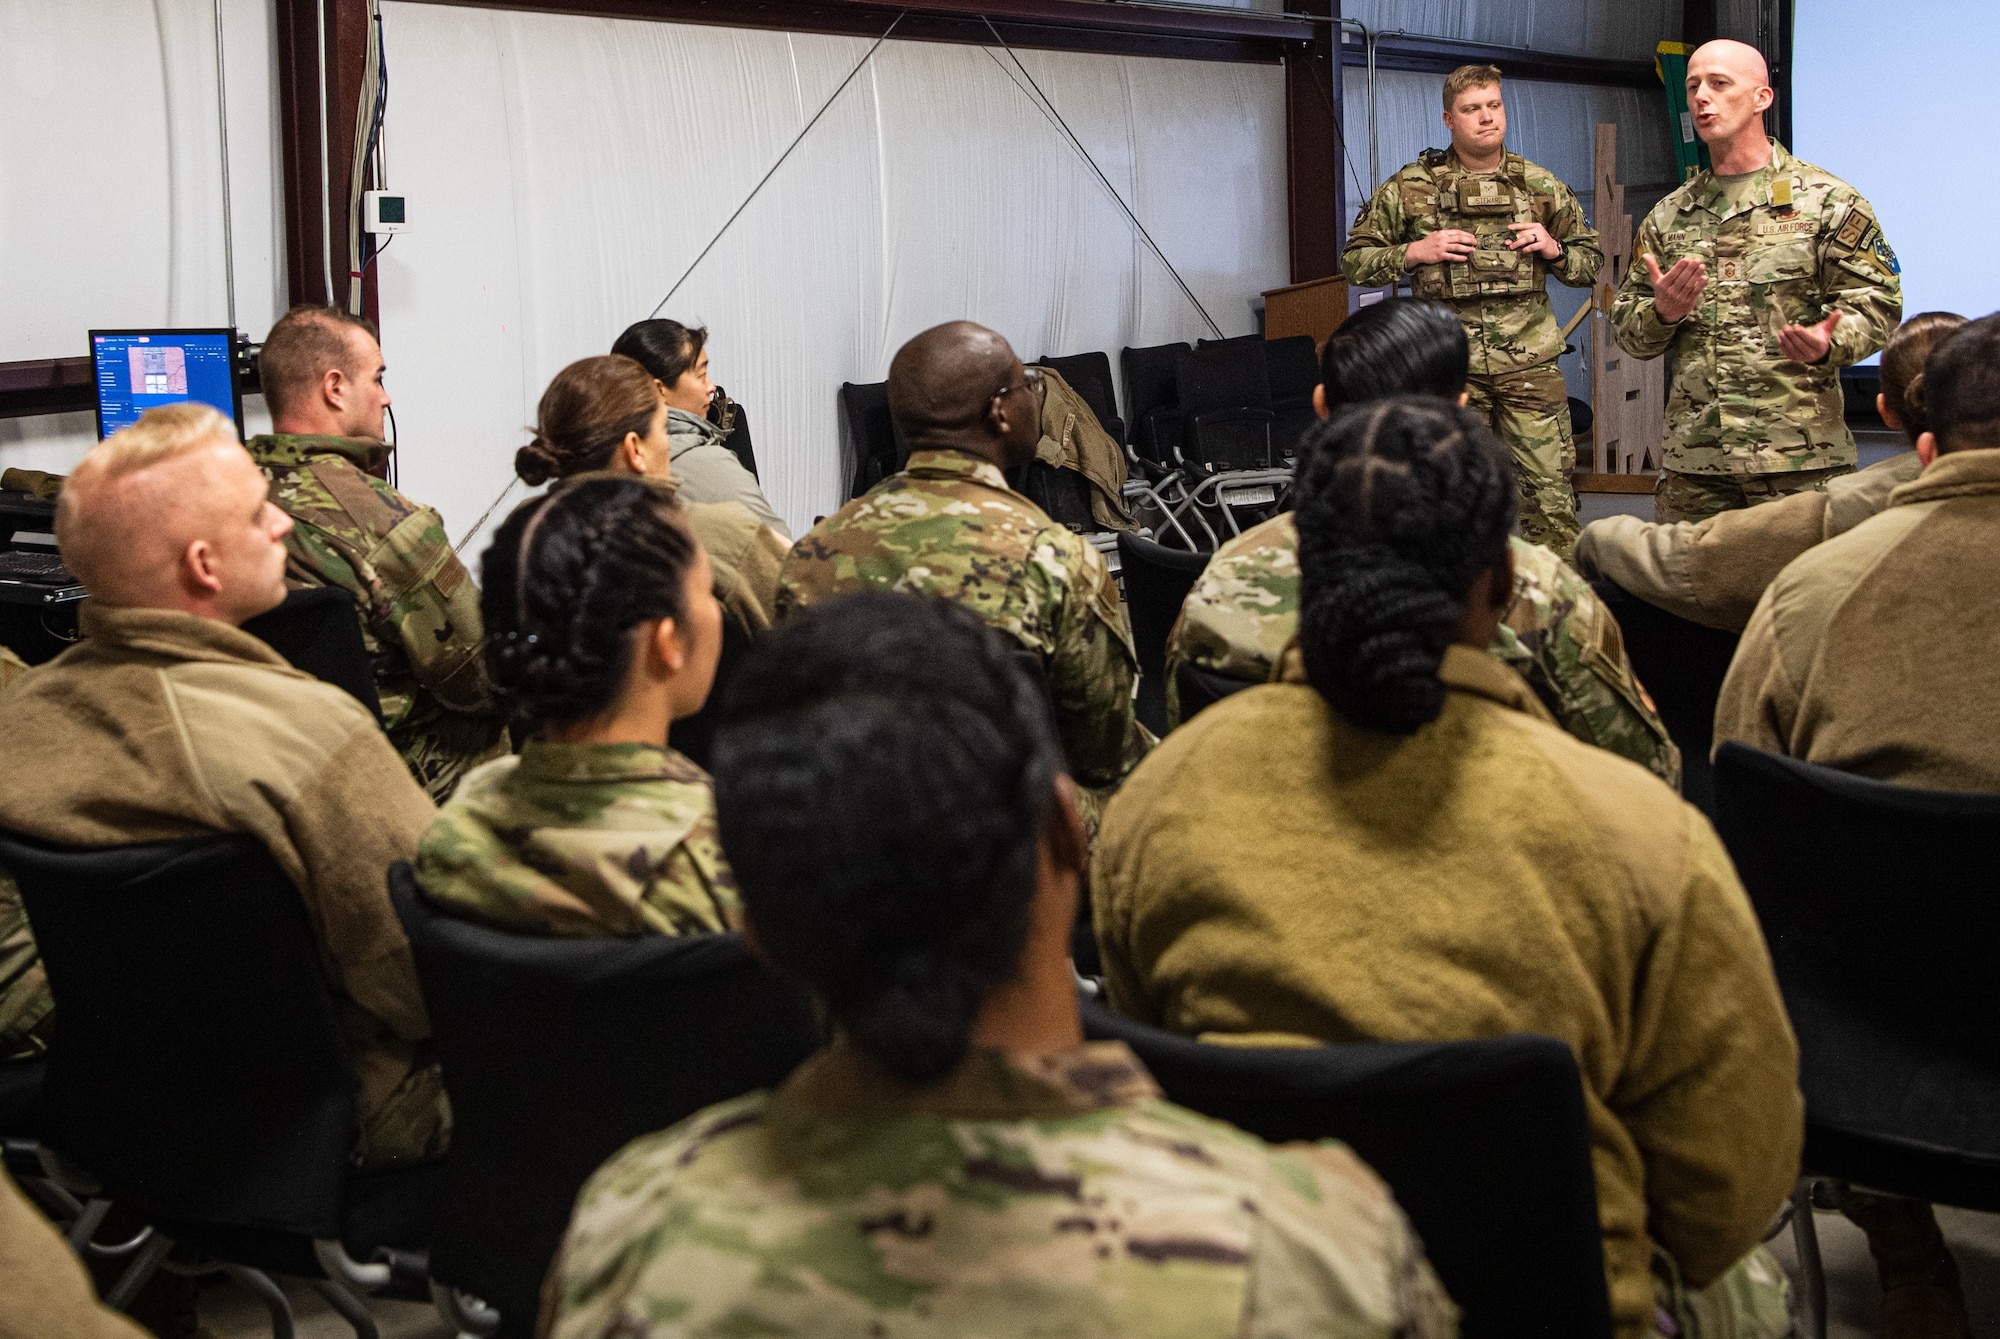 SCHRIEVER SPACE FORCE BASE, Colo. -- Senior Master Sgt. Edward Mann, 50th Security Forces, briefs military members during the initiative "Connecting Airmen and Guardians to the Mission". The initiative was prompted by senior enlisted leaders. (U.S. Space Force Photo by Tiana Williams)